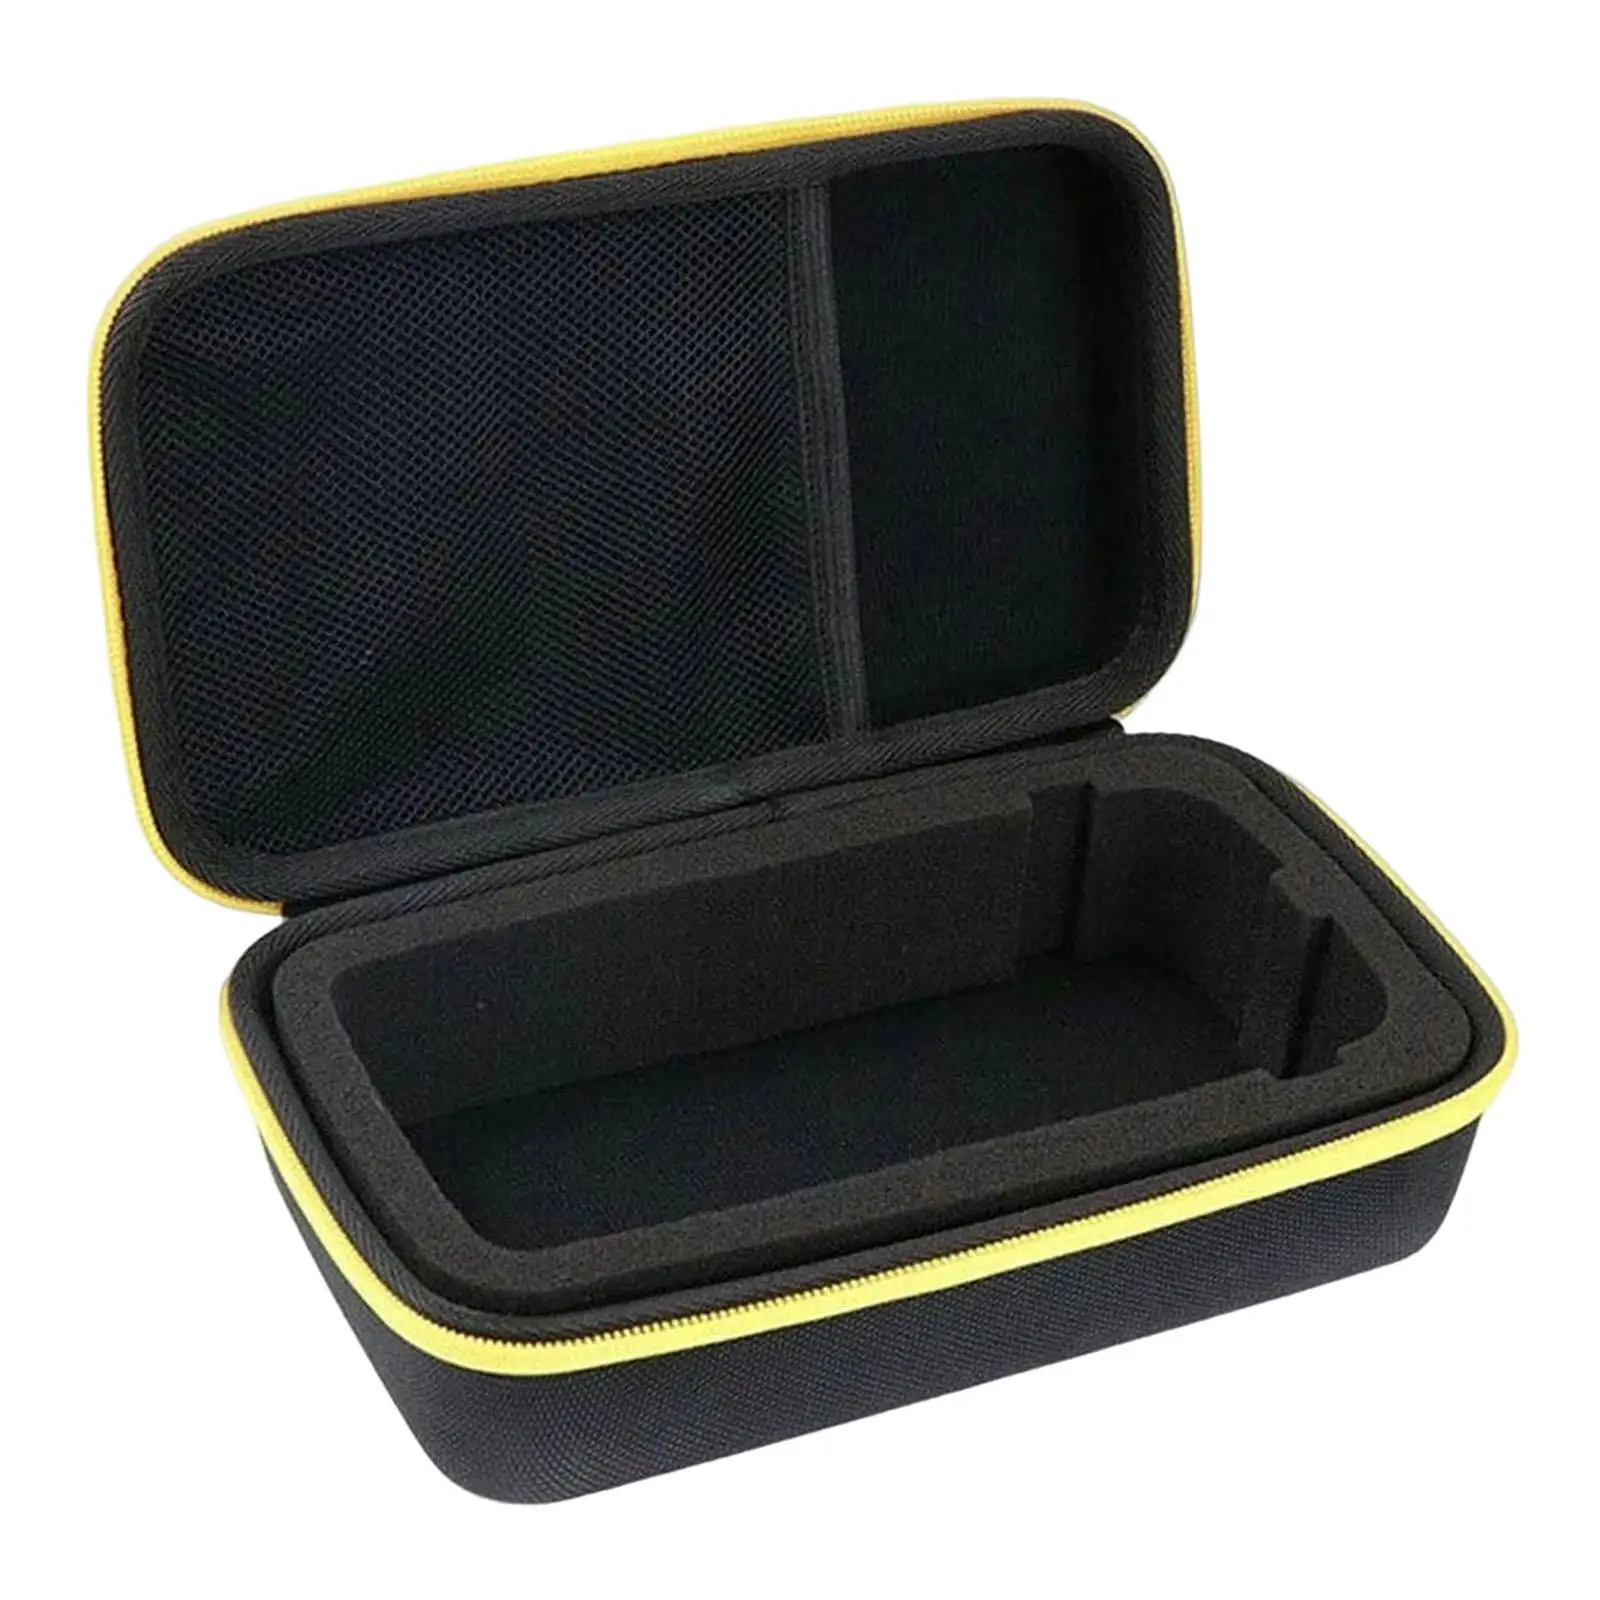 Hard universal meter Meter Soft Case Lightweight with Handle mesh Metal Zipper Portbale Handy Carrying Case for F115C